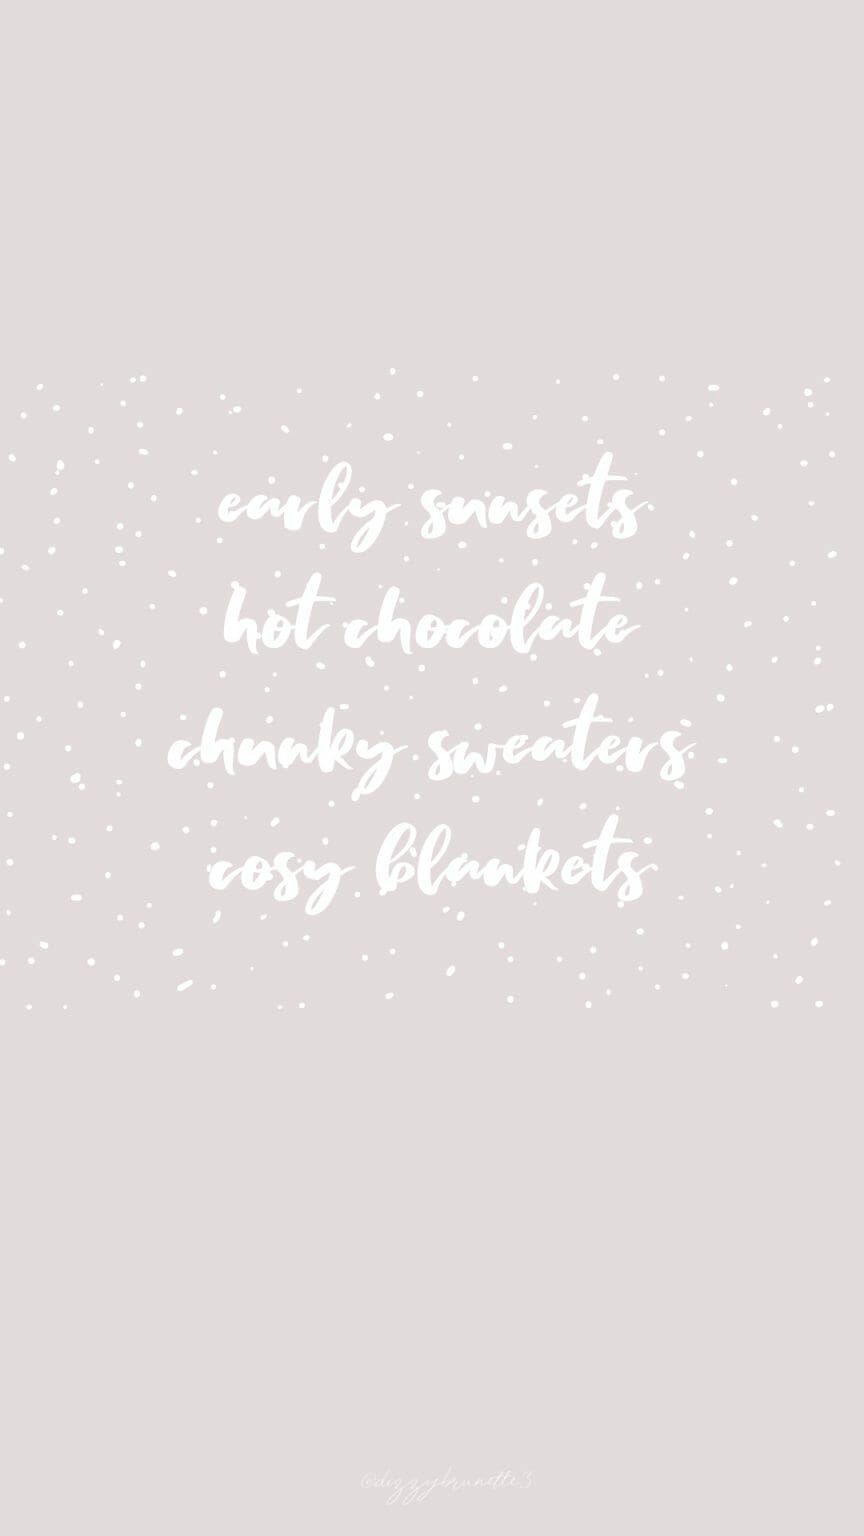 Early sunsets, hot chocolate, chunky sweaters, cozy blankets. - Christmas iPhone, white Christmas